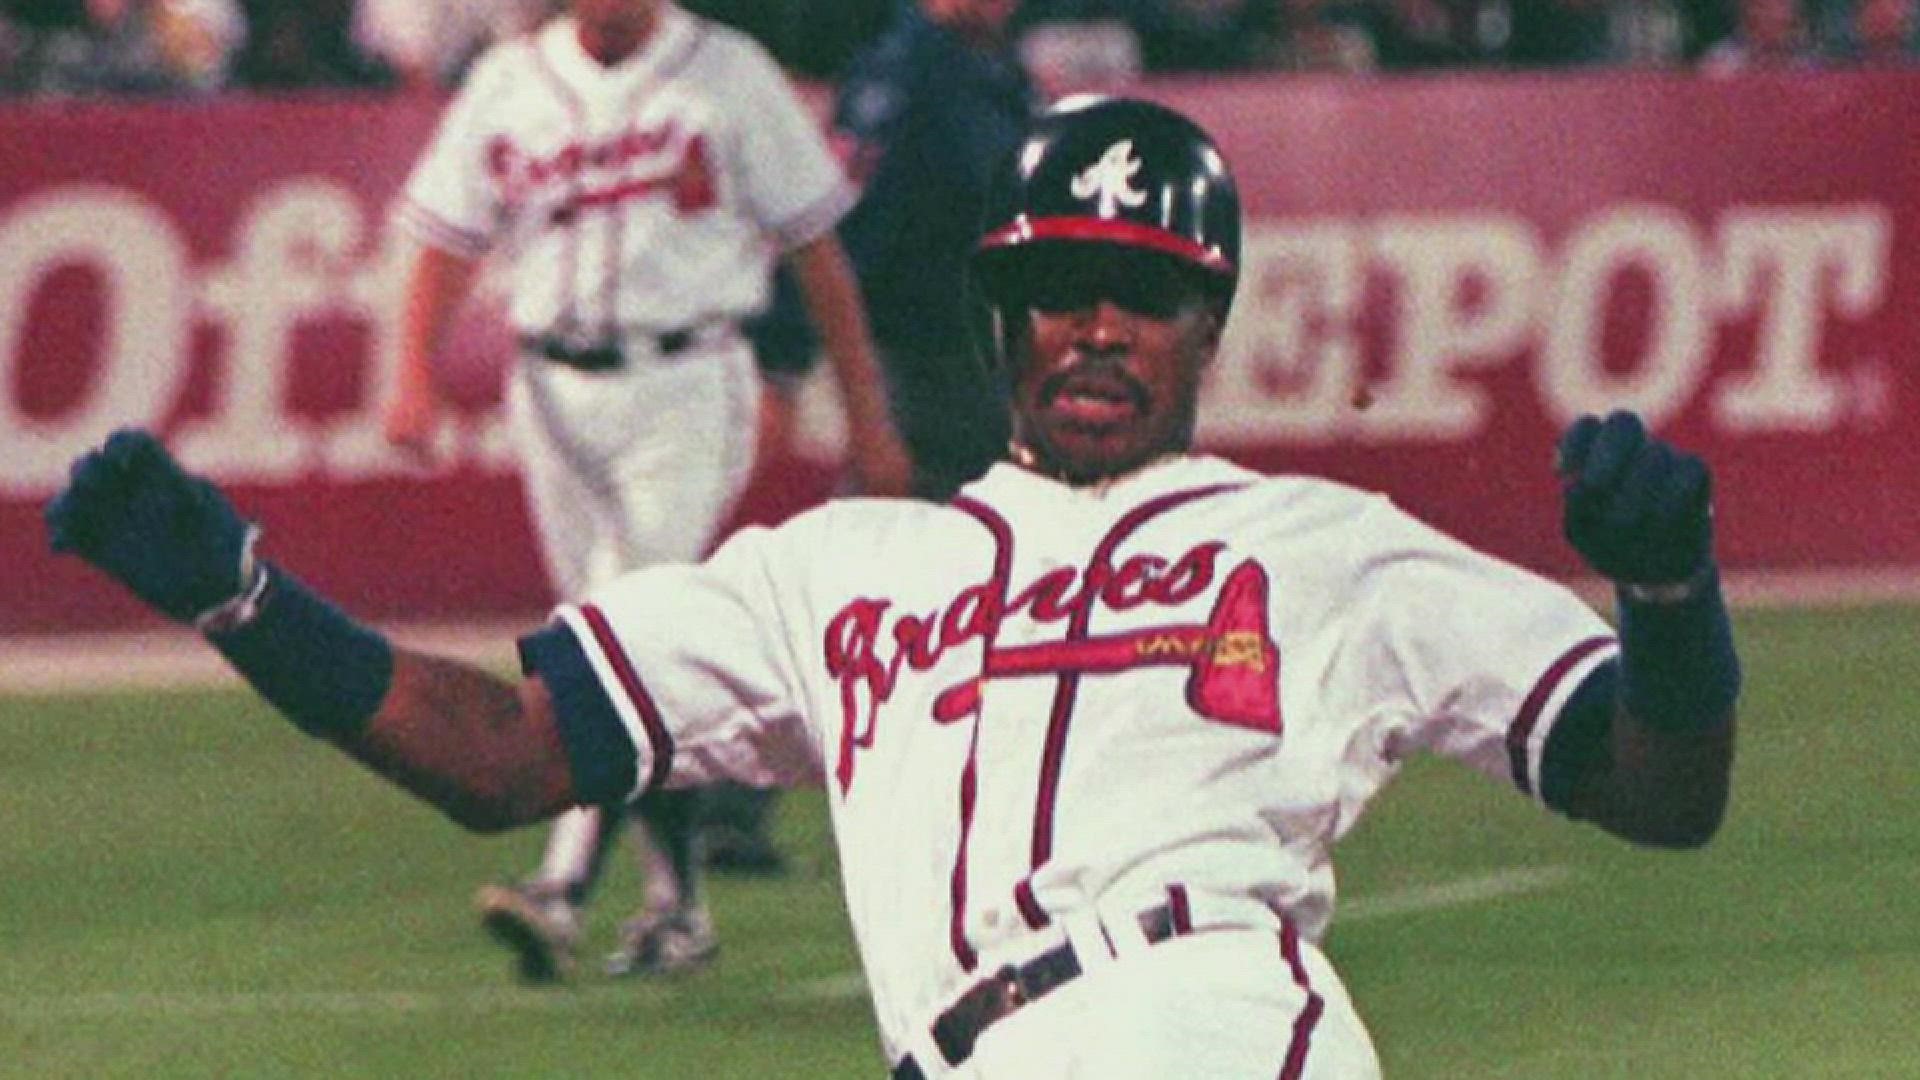 McGriff, nicknamed "Crime Dog," was a 5-time All-Star and 3-time Silver Slugger winner who won the 1995 World Series with the Atlanta Braves.